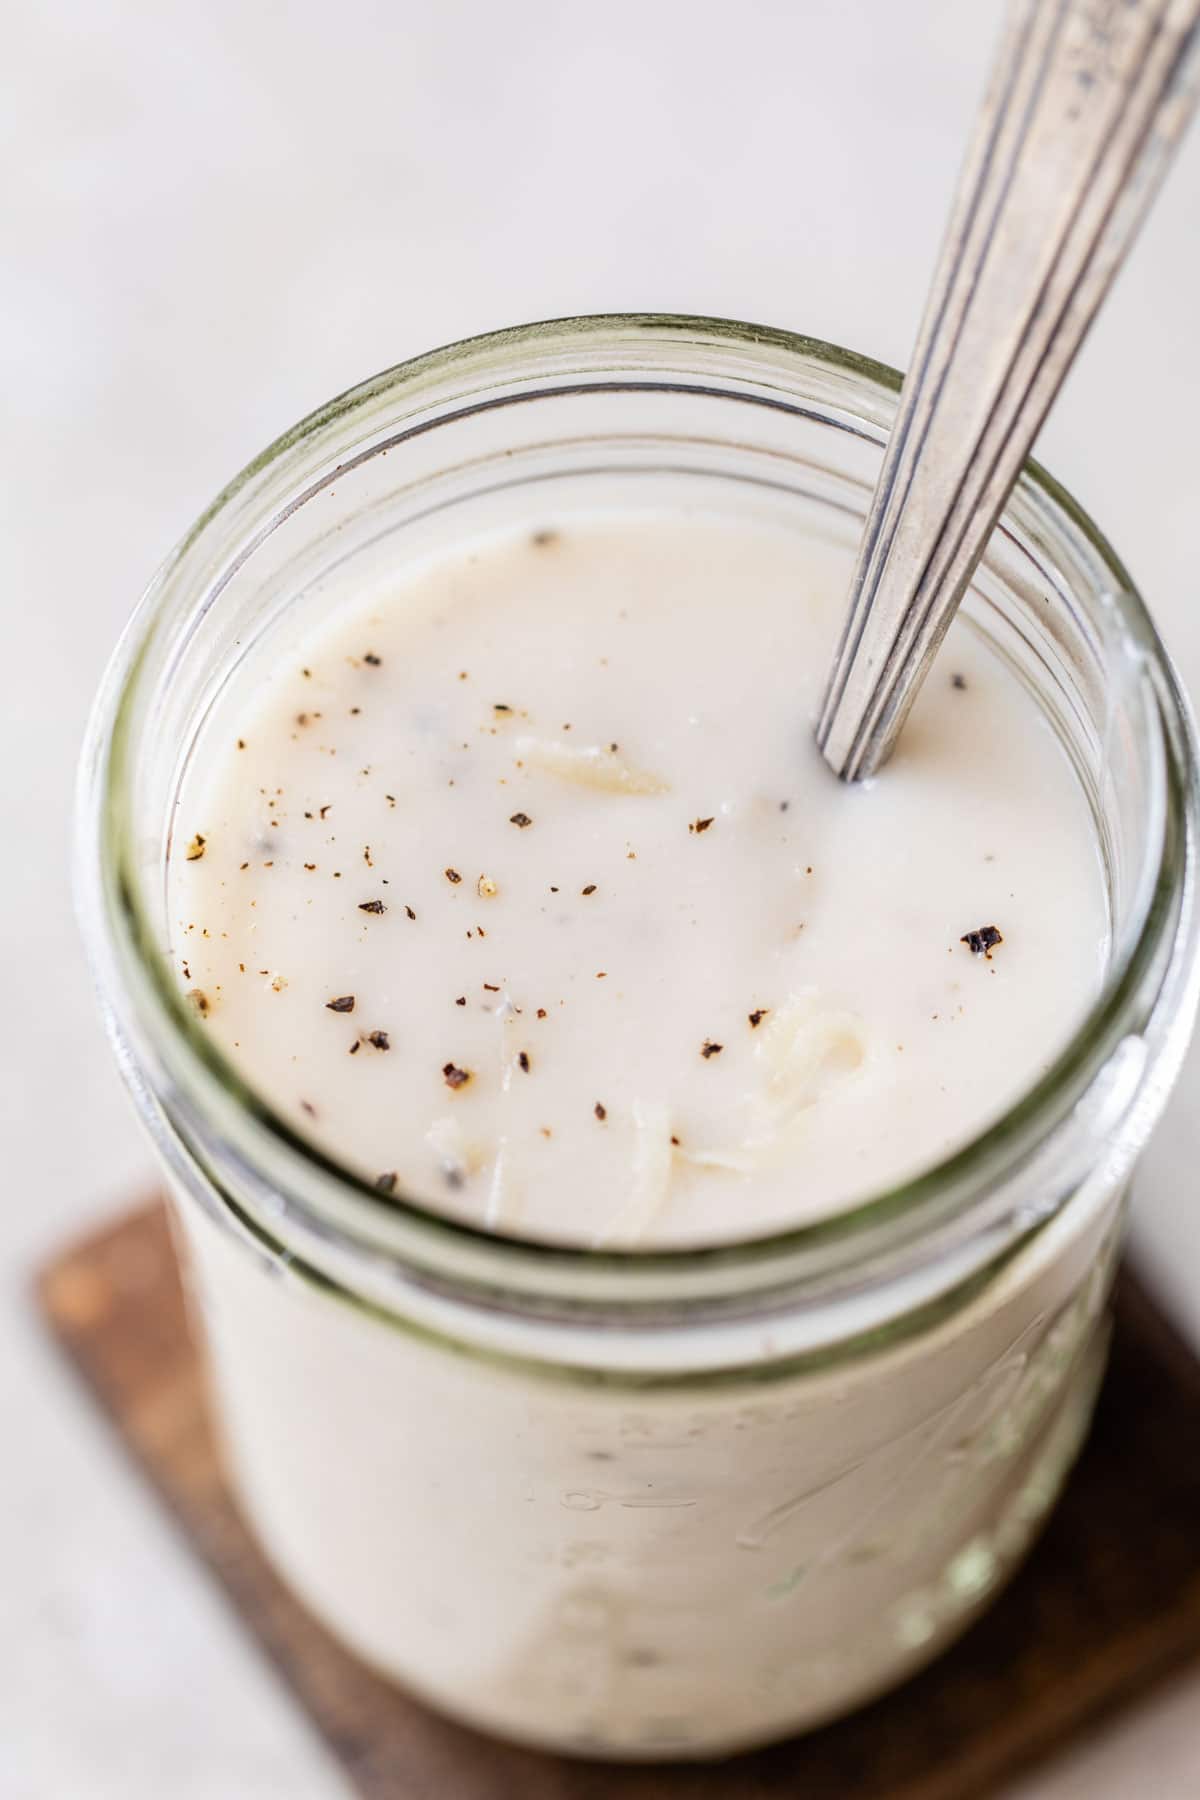 creamy white sauce in a glass jar sprinkled with black pepper